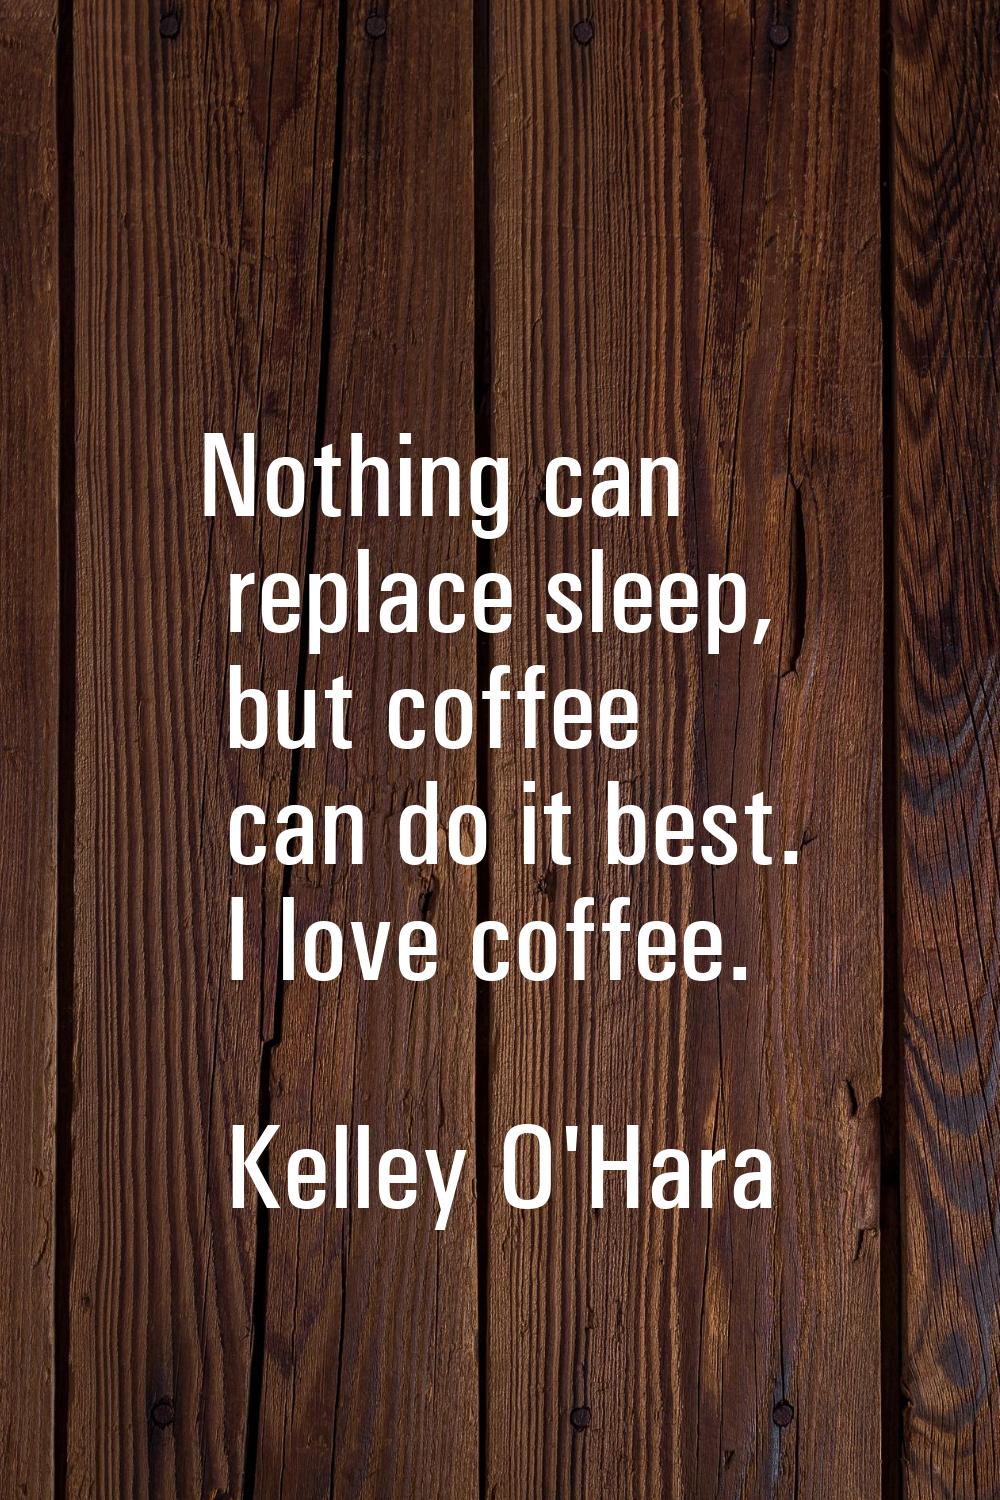 Nothing can replace sleep, but coffee can do it best. I love coffee.